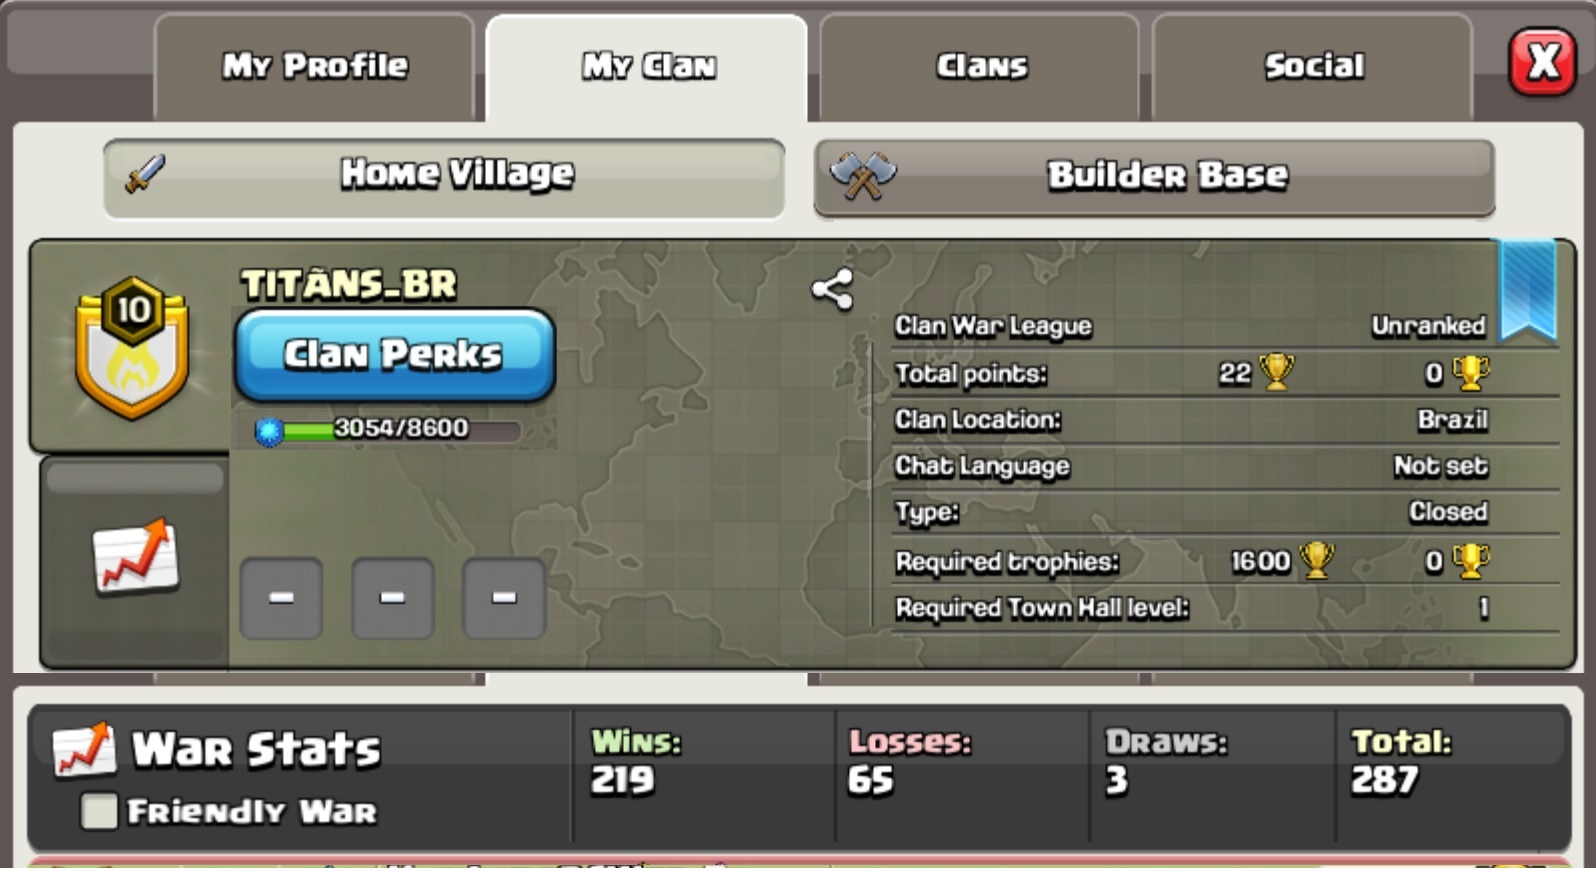 Clan level: 10 | Clan Name: TITANS BR | League: Unranked | Warlog Positive + (very good)-10_tit-ns_br_unranked-jpg